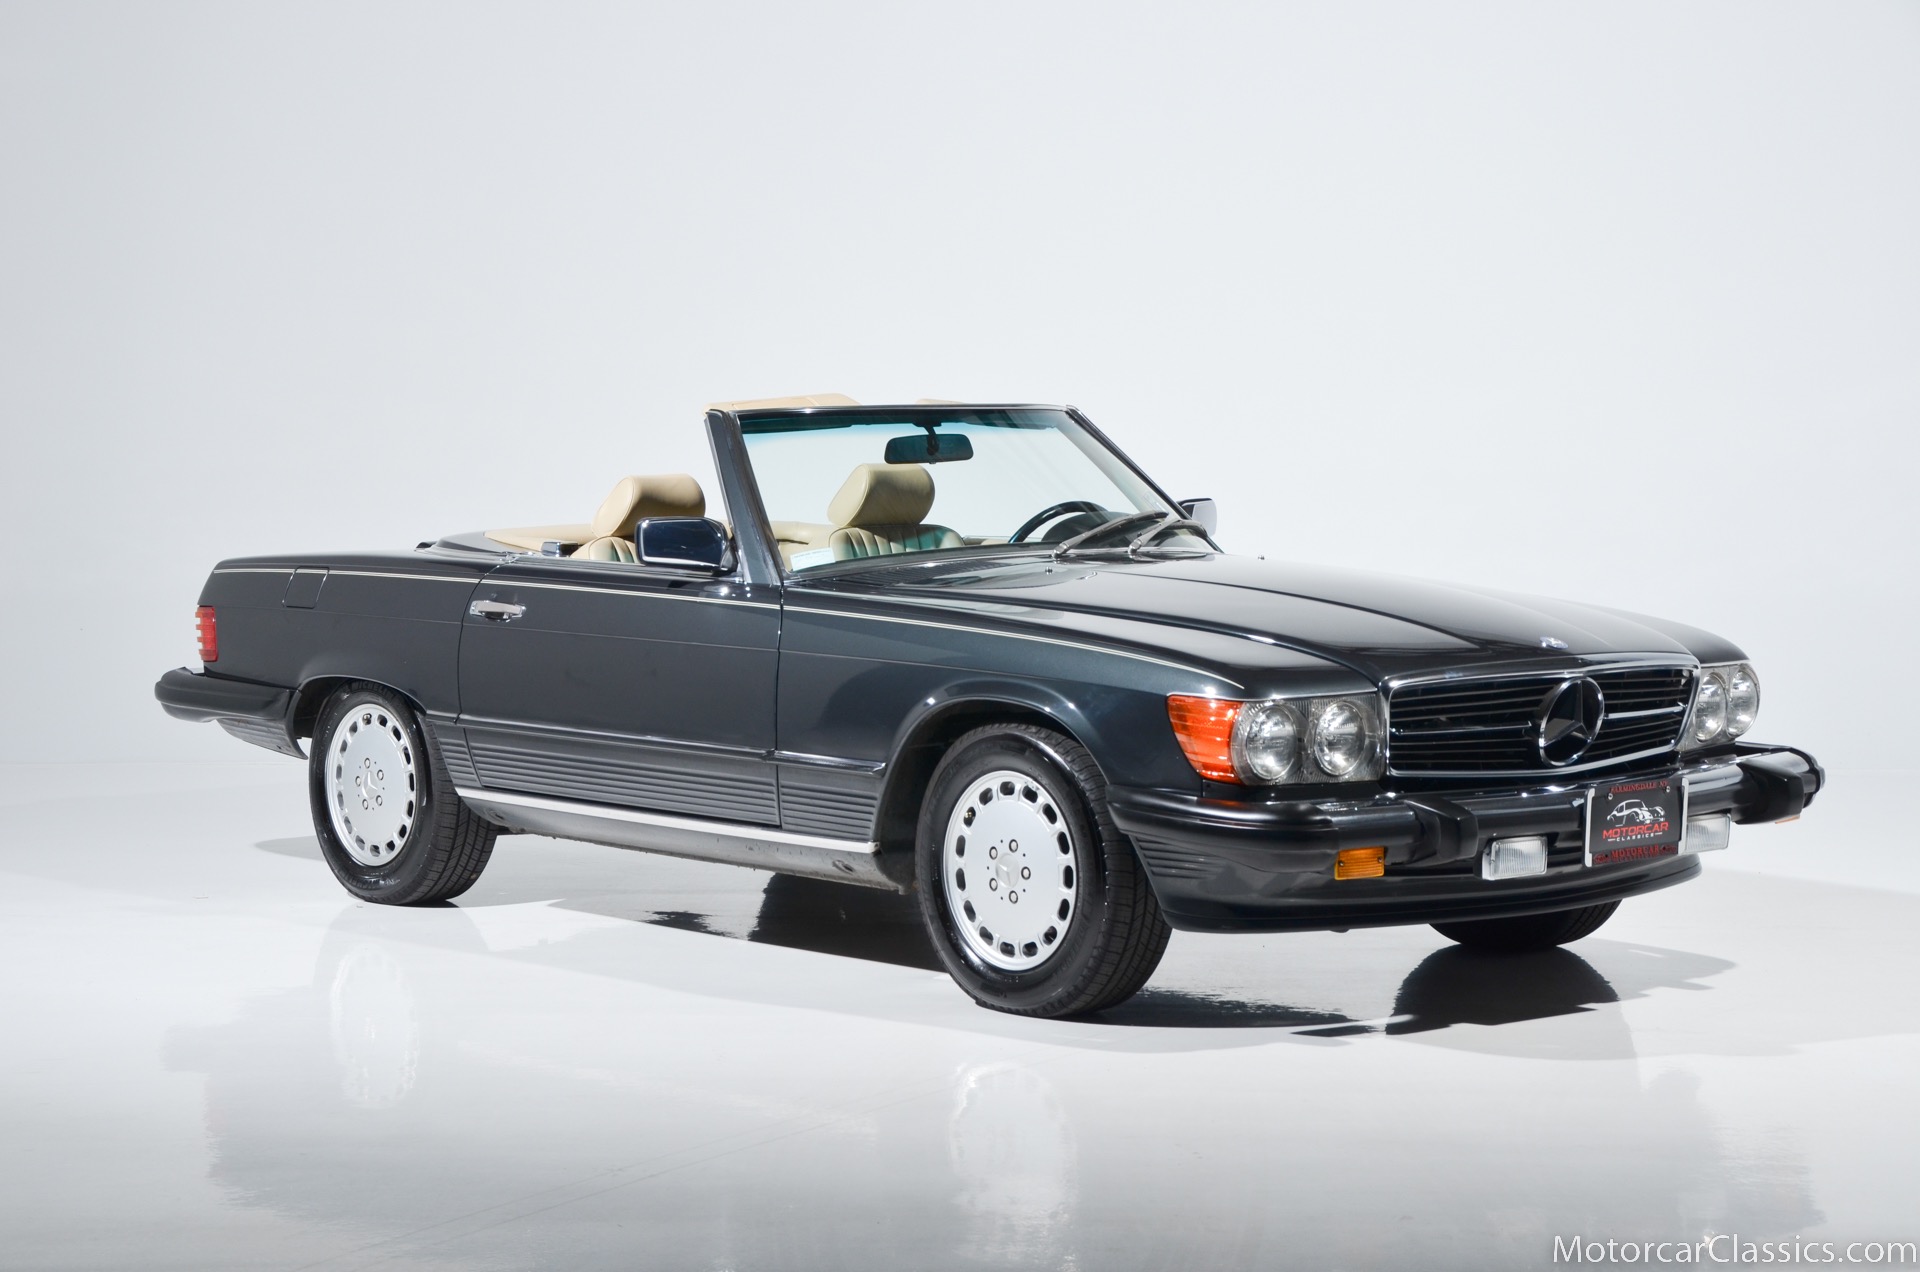 Used 1989 Mercedes Benz 560 Class 560sl For Sale 74 900 Motorcar Classics Stock 1446